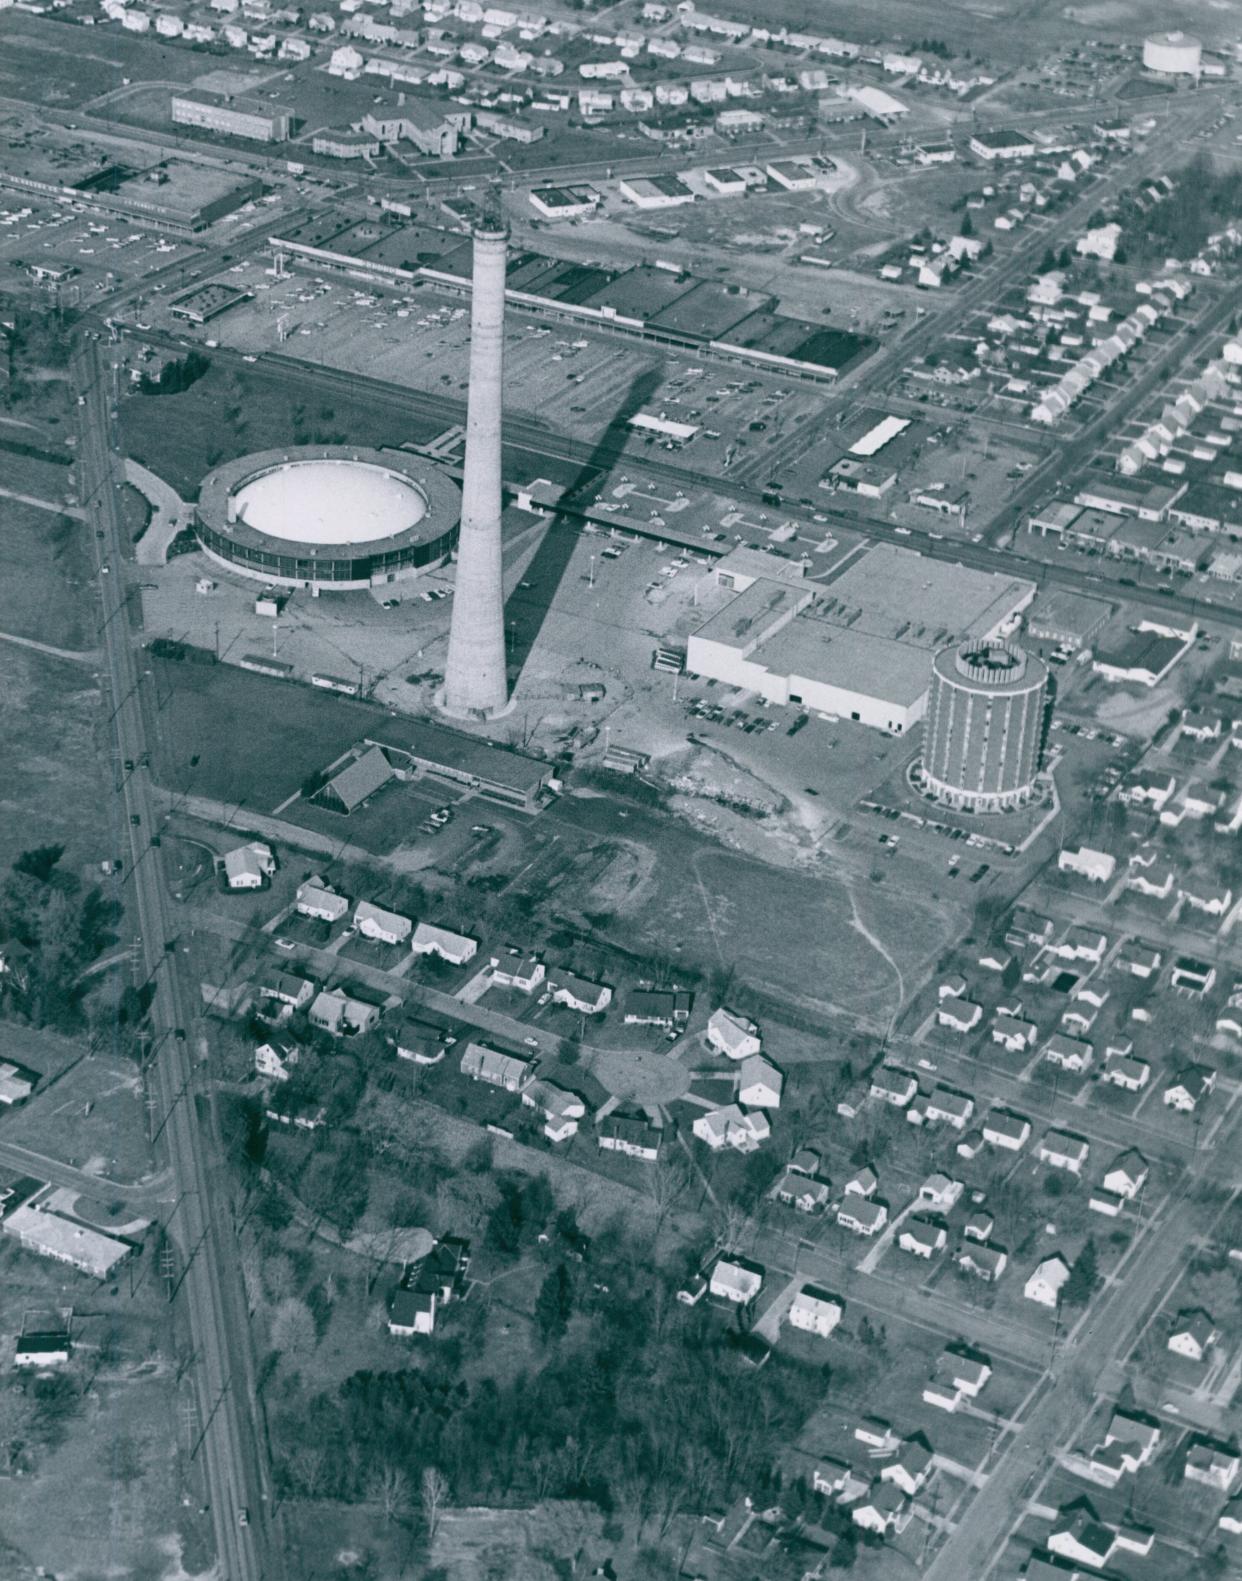 The unfinished Cathedral Tower is pictured in 1988 next to the Cathedral of Tomorrow in Cuyahoga Falls. The street to the left is Portage Trail Extension. State Road and State Road Shopping Center can be seen near the top of the image.